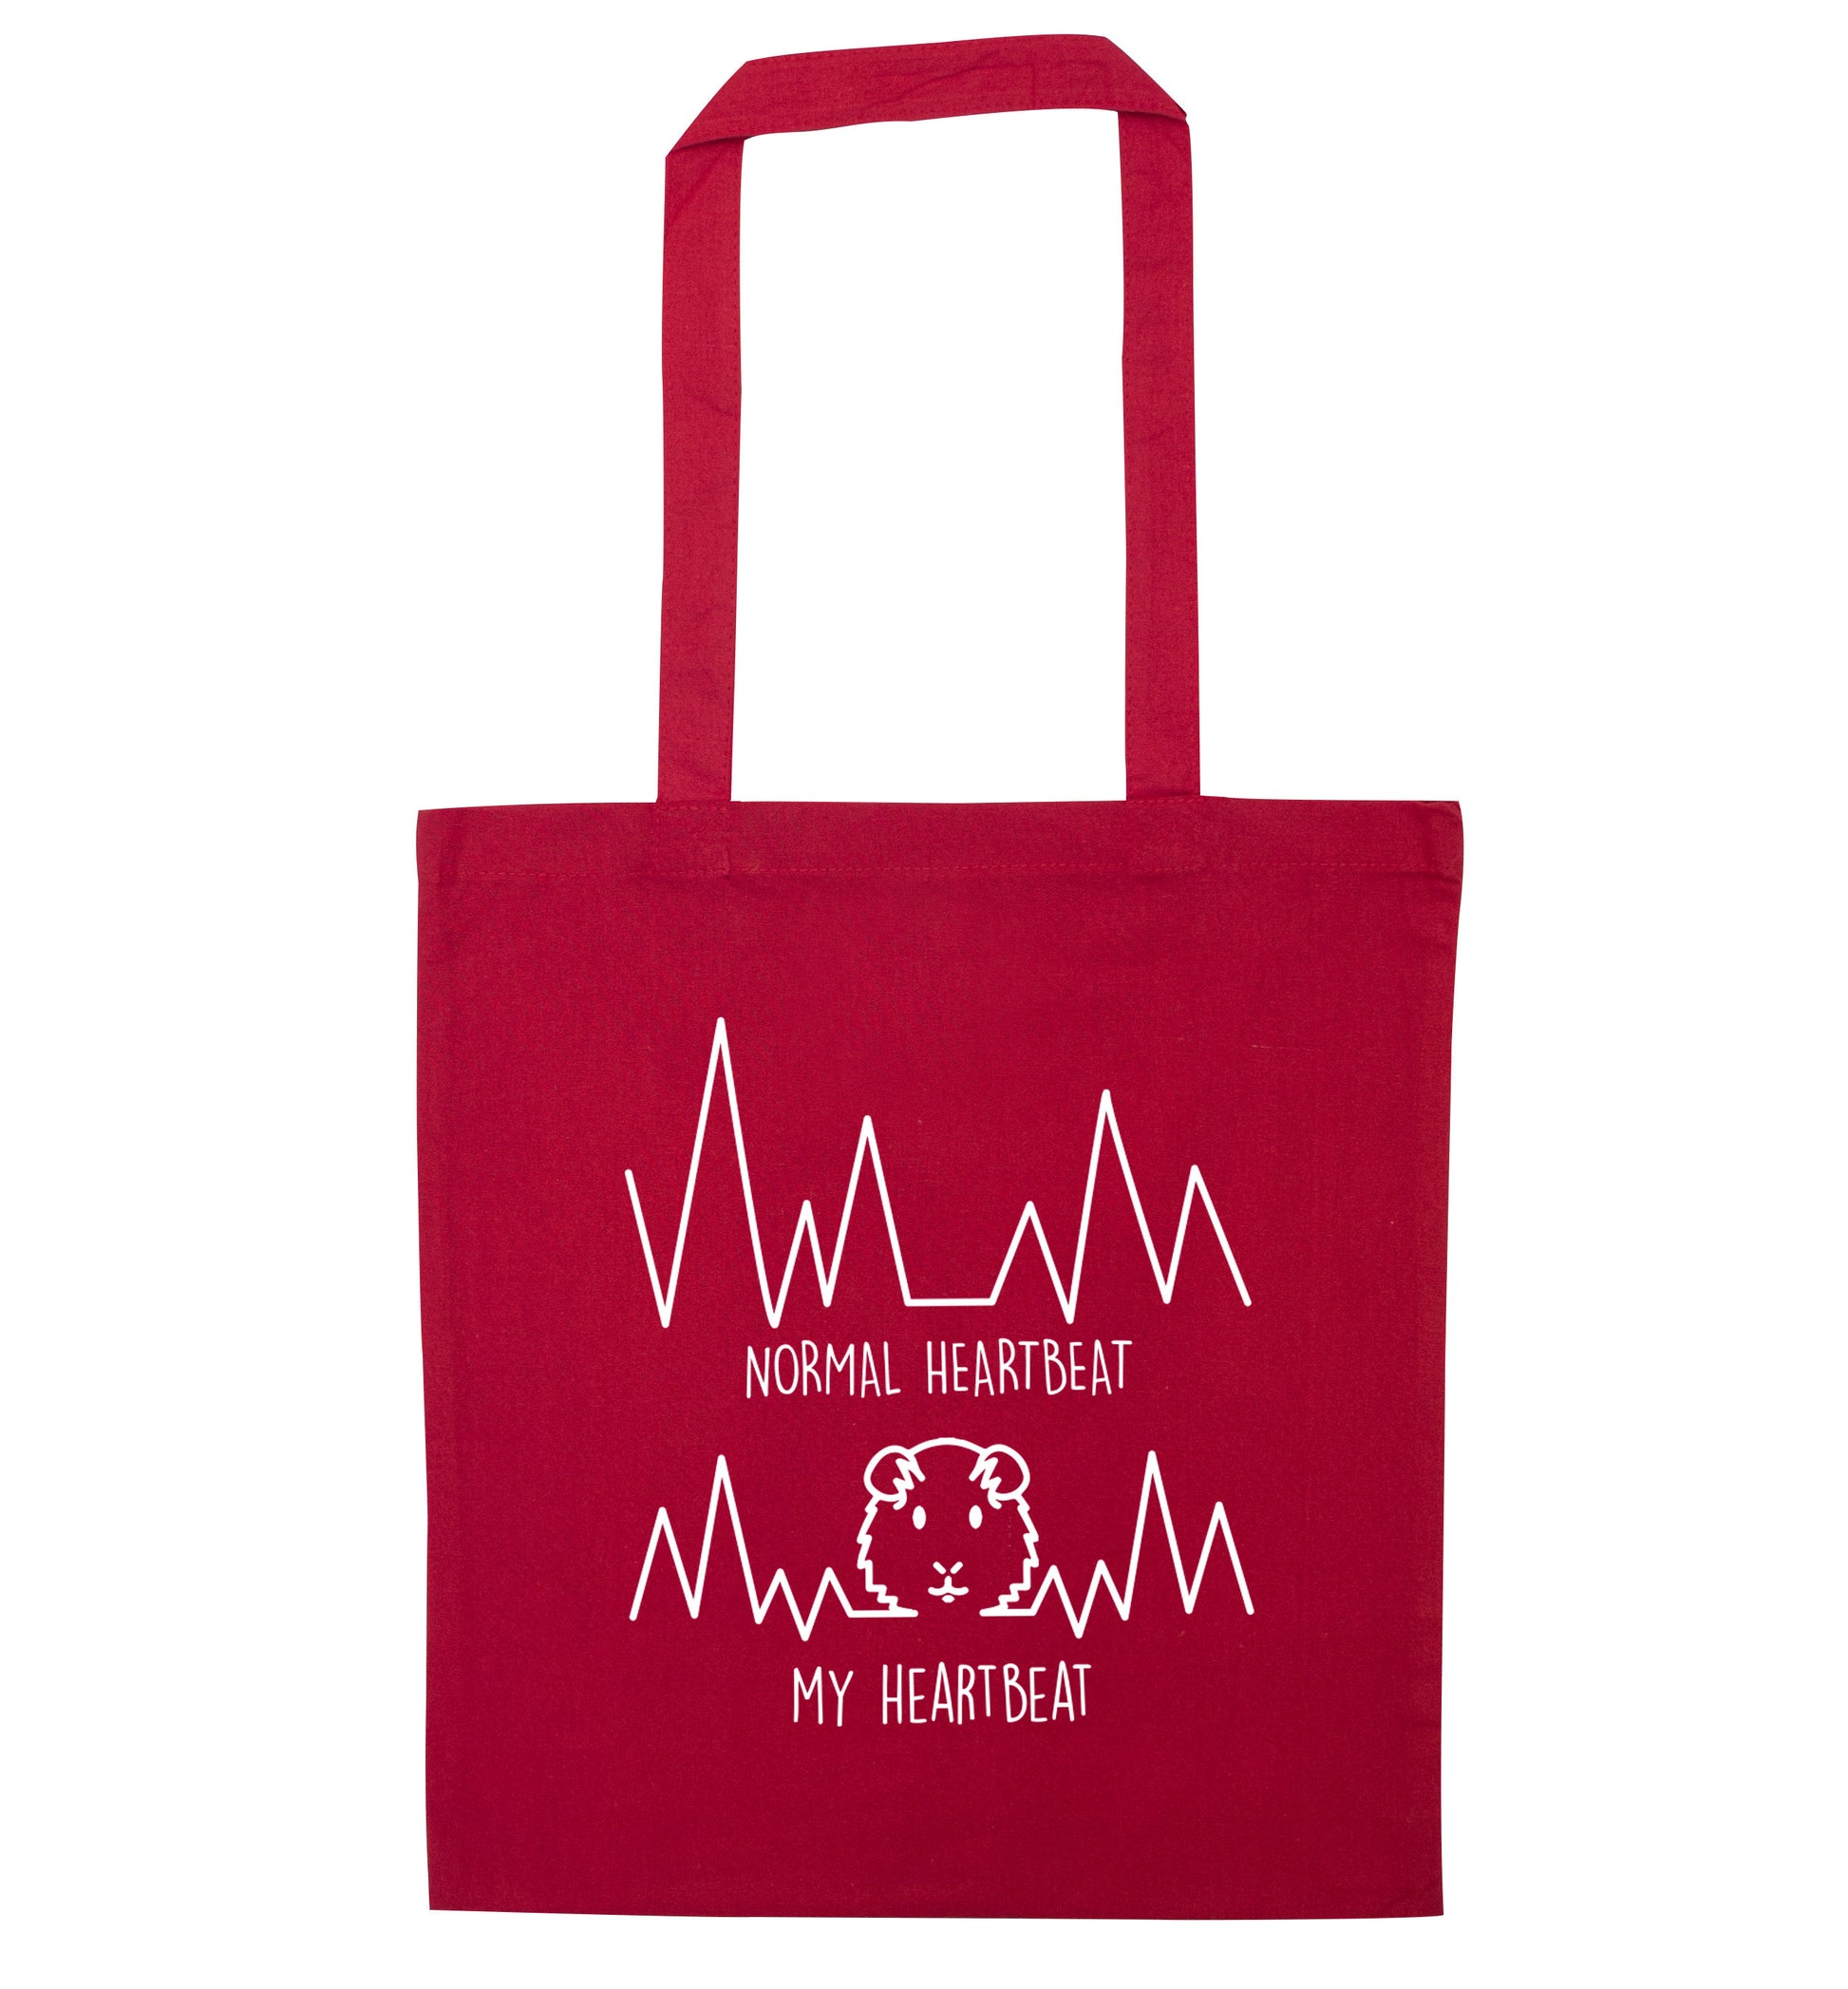 Normal heartbeat vs my heartbeat guinea pig lover red tote bag